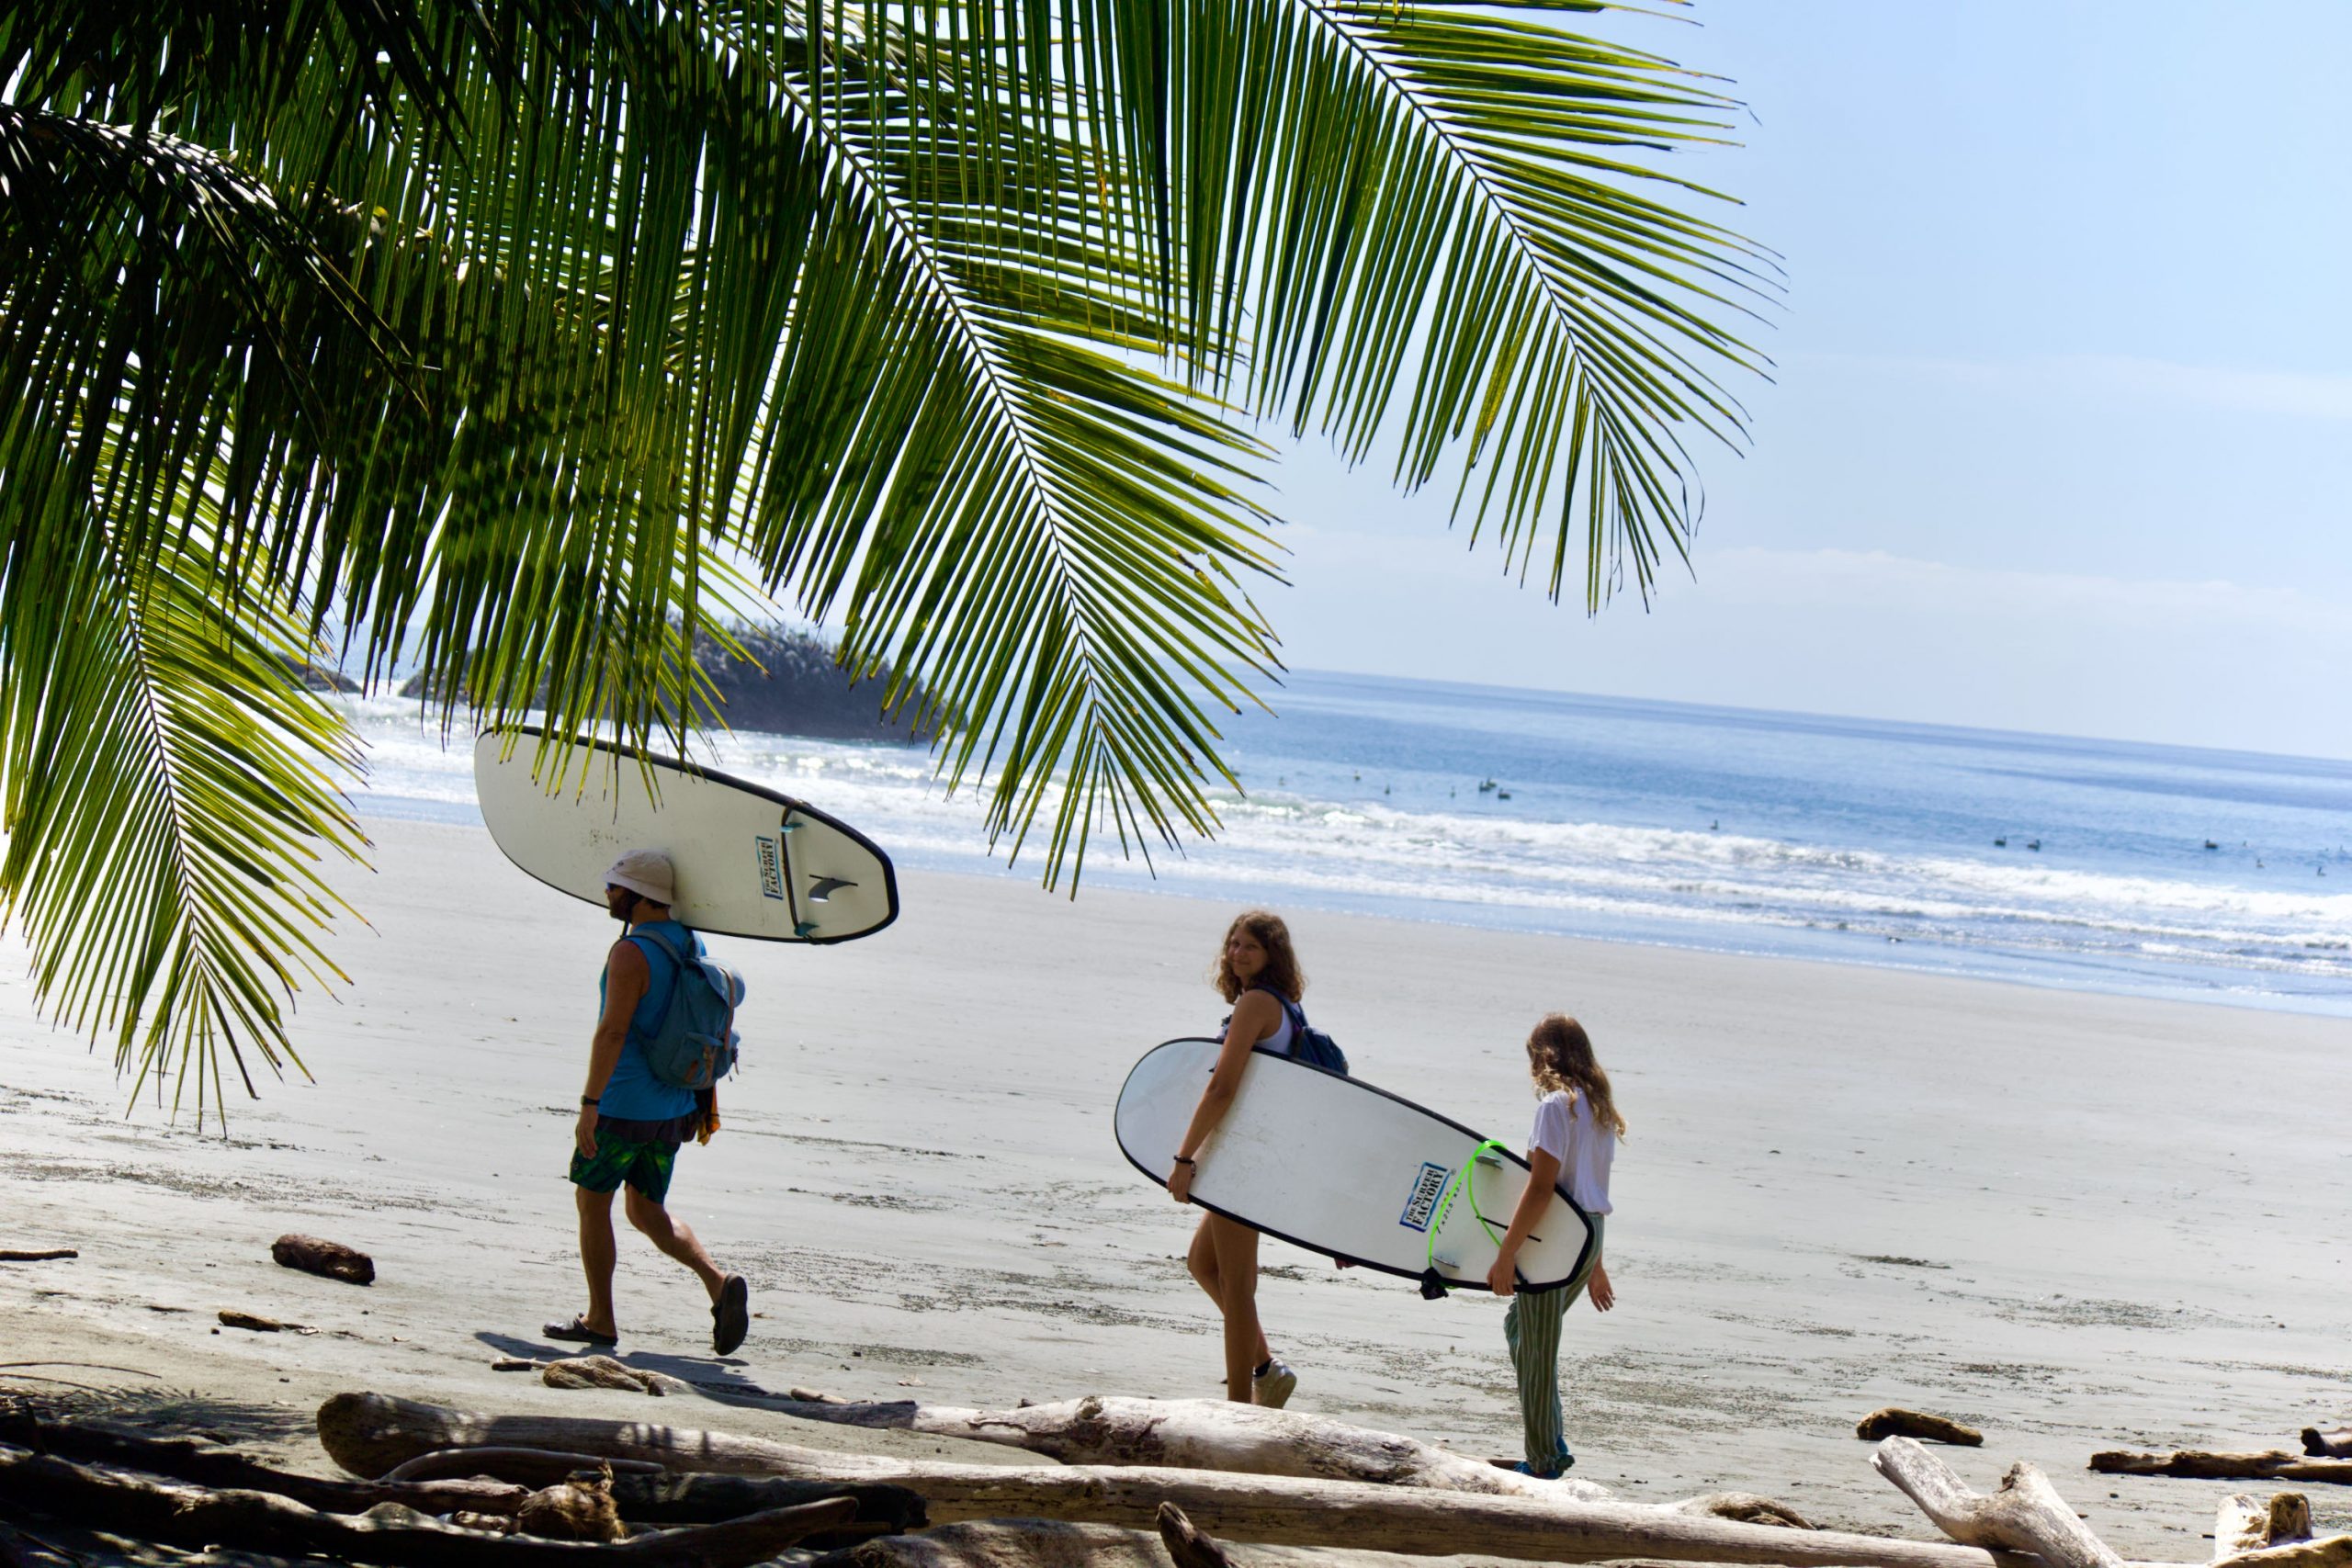 It’s a beautiful day…lalalala – surf lessons in Costa Rica